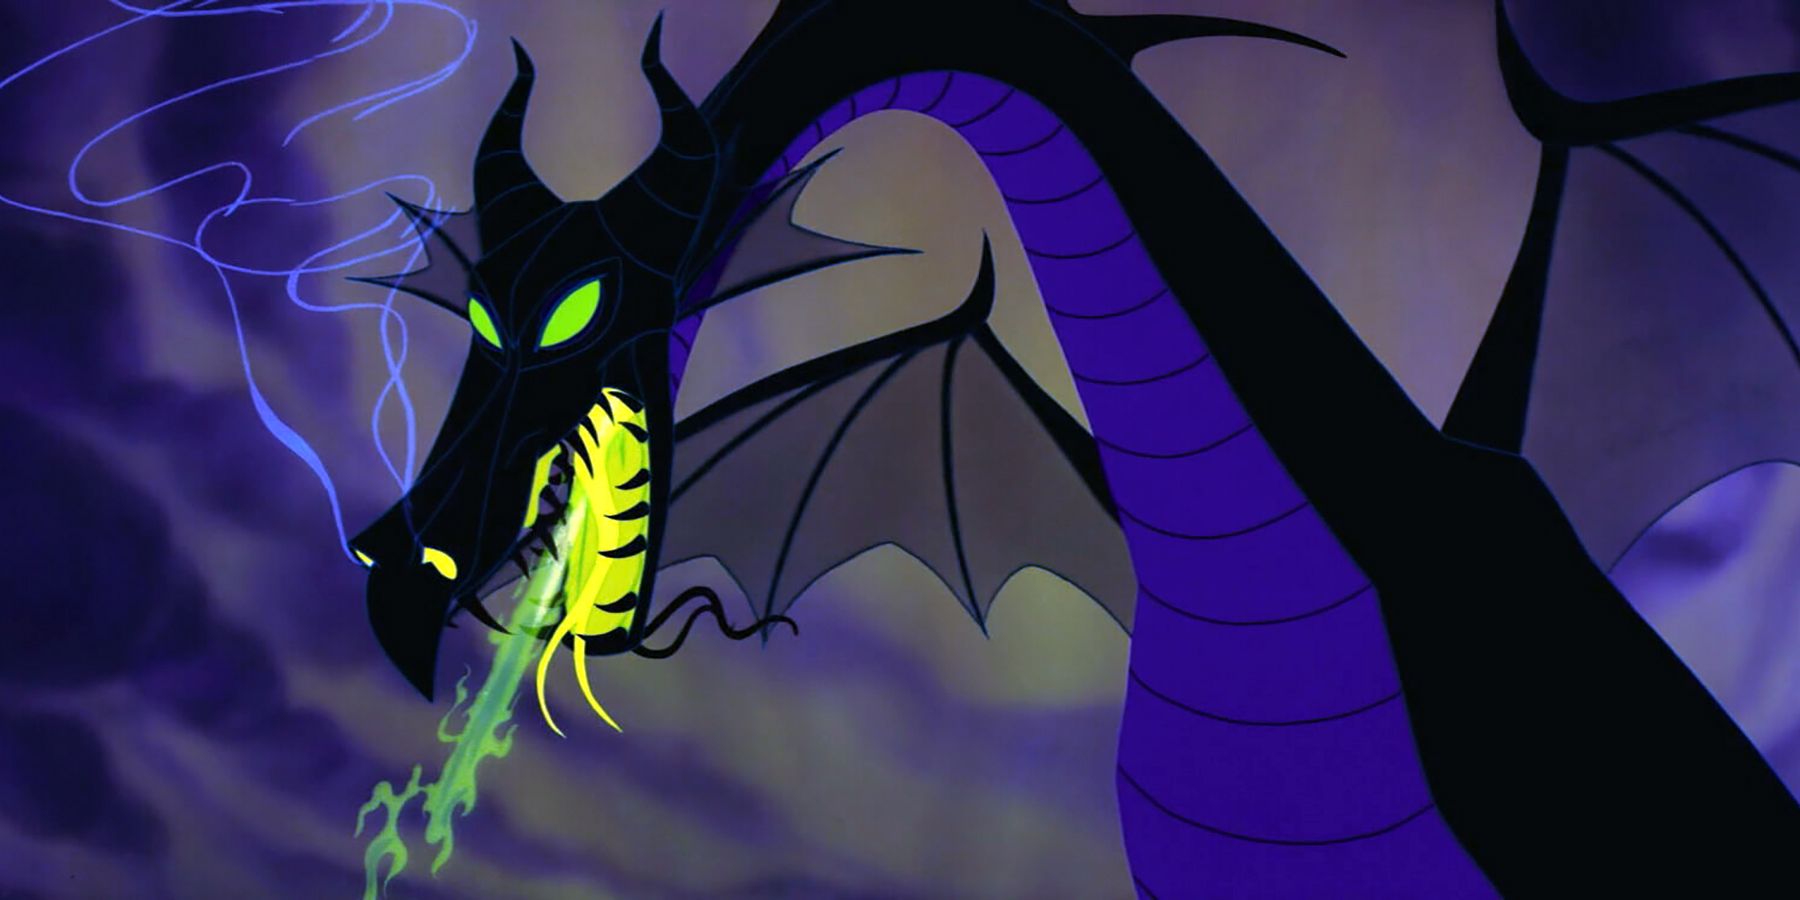 Maleficent in her dragon form from Sleeping Beauty